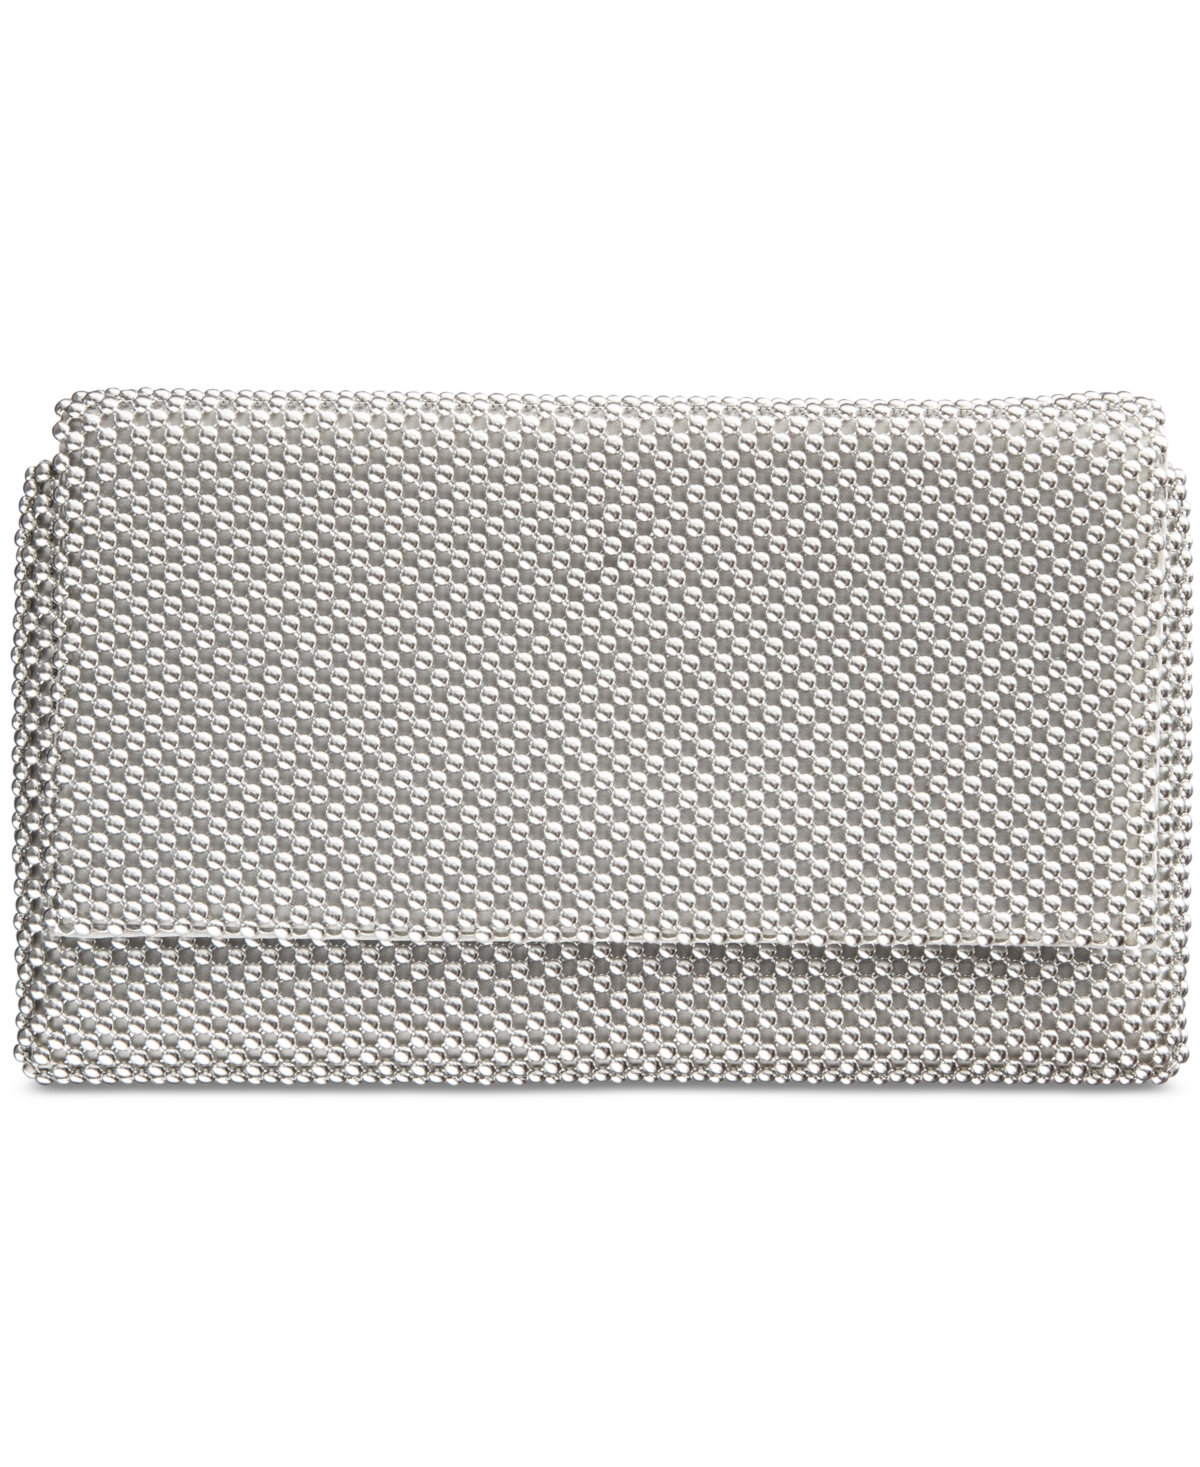 Inc International Concepts Prudence Shiny Mesh Clutch, Created For Macy's In Silver,silver